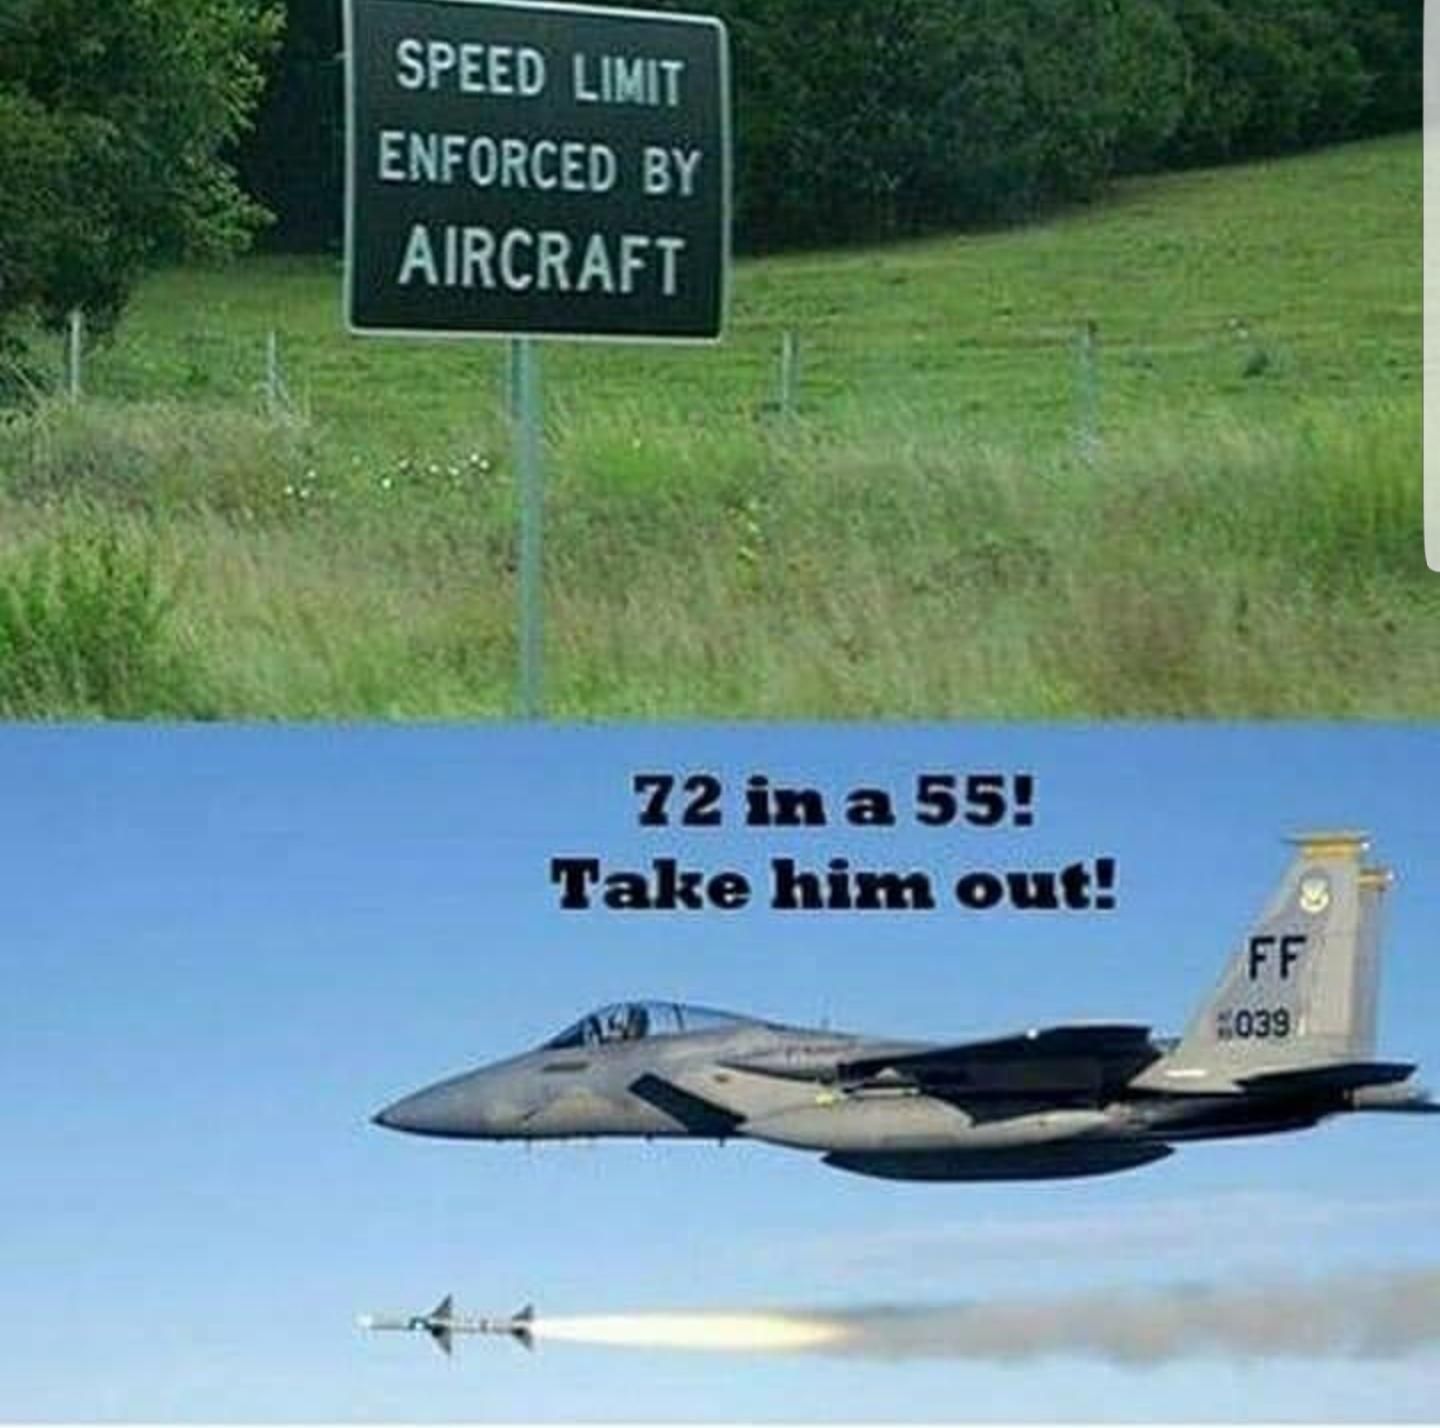 Just go faster than the jet?